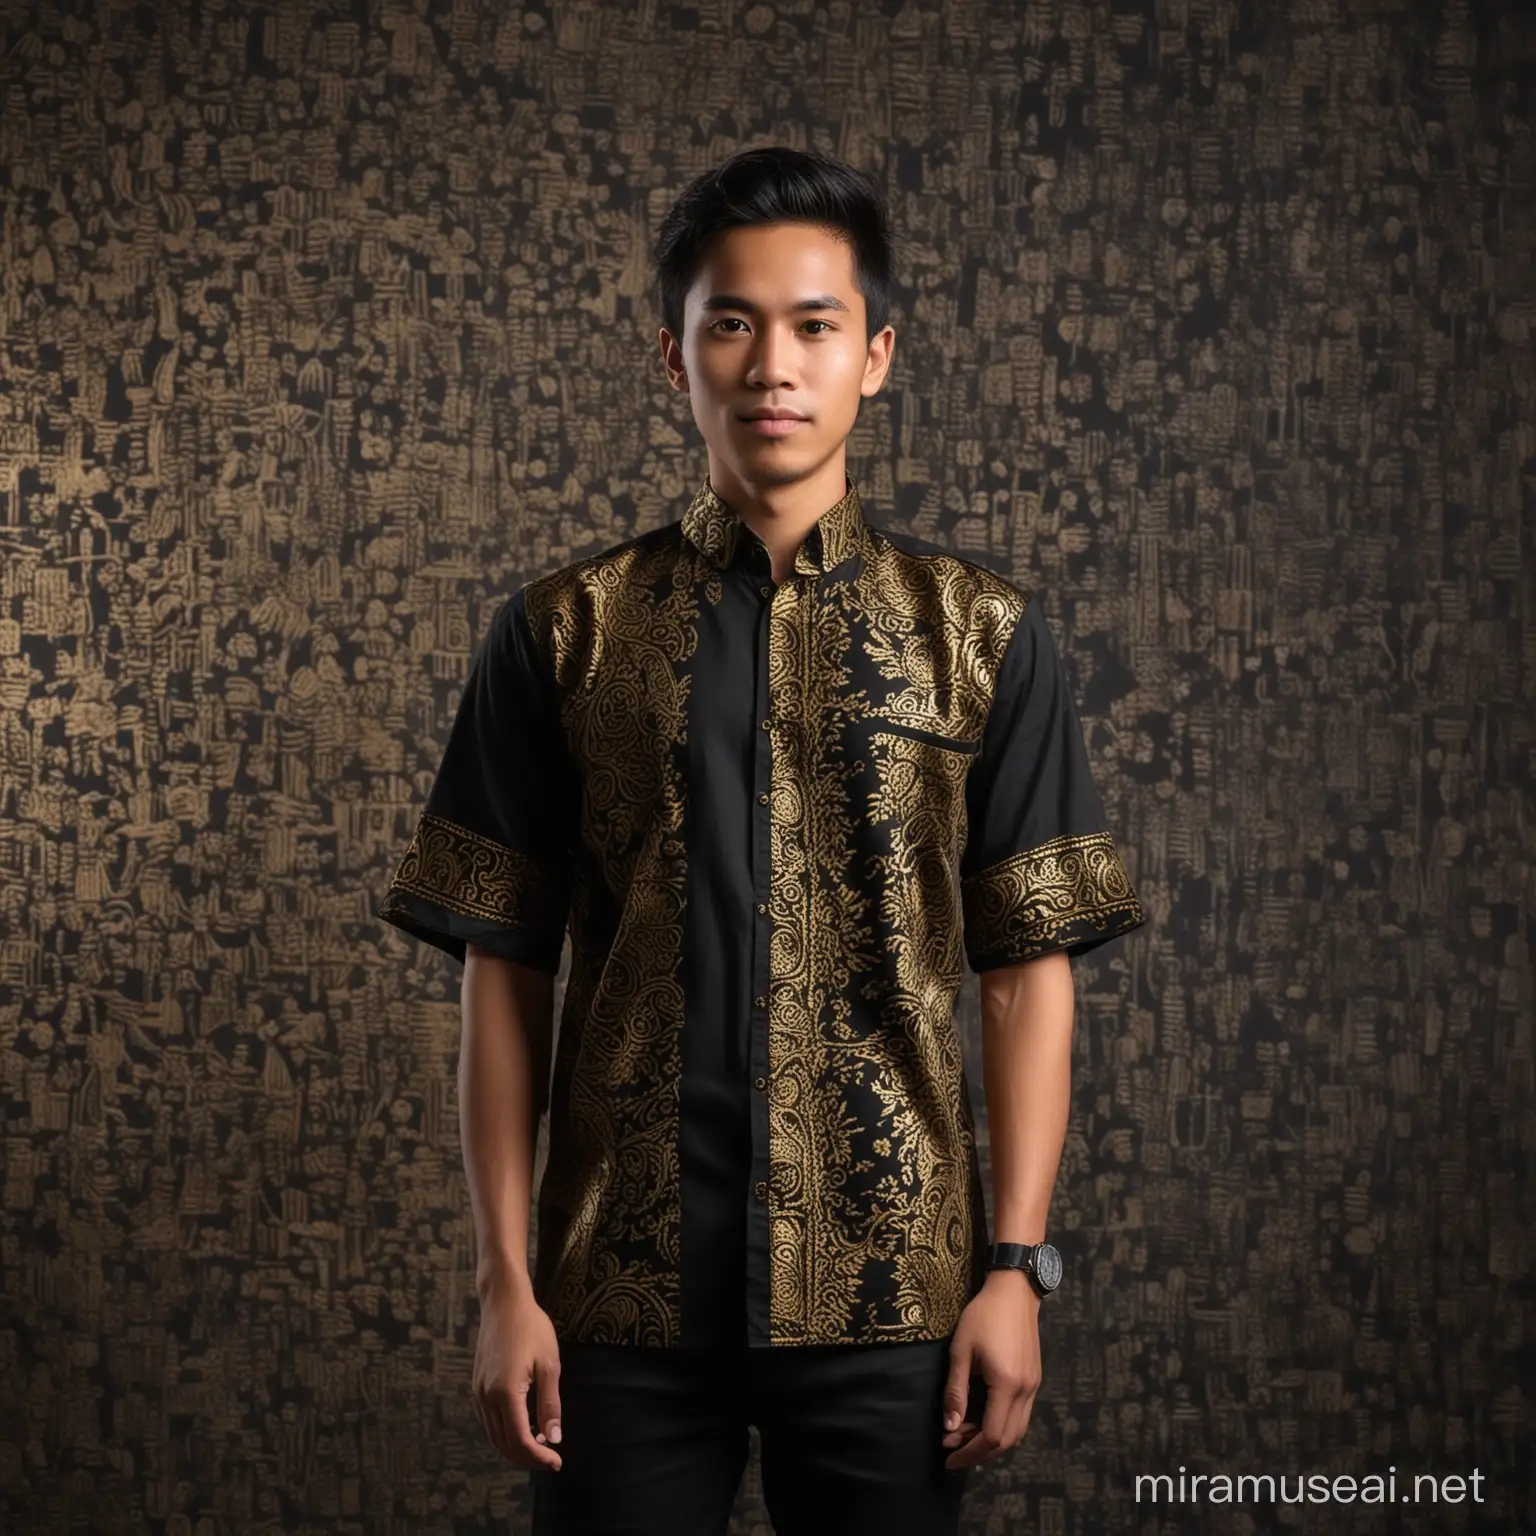 Indonesian Man in Traditional Attire Young Man in Black Batik Shirt and Songkok against Studio Background